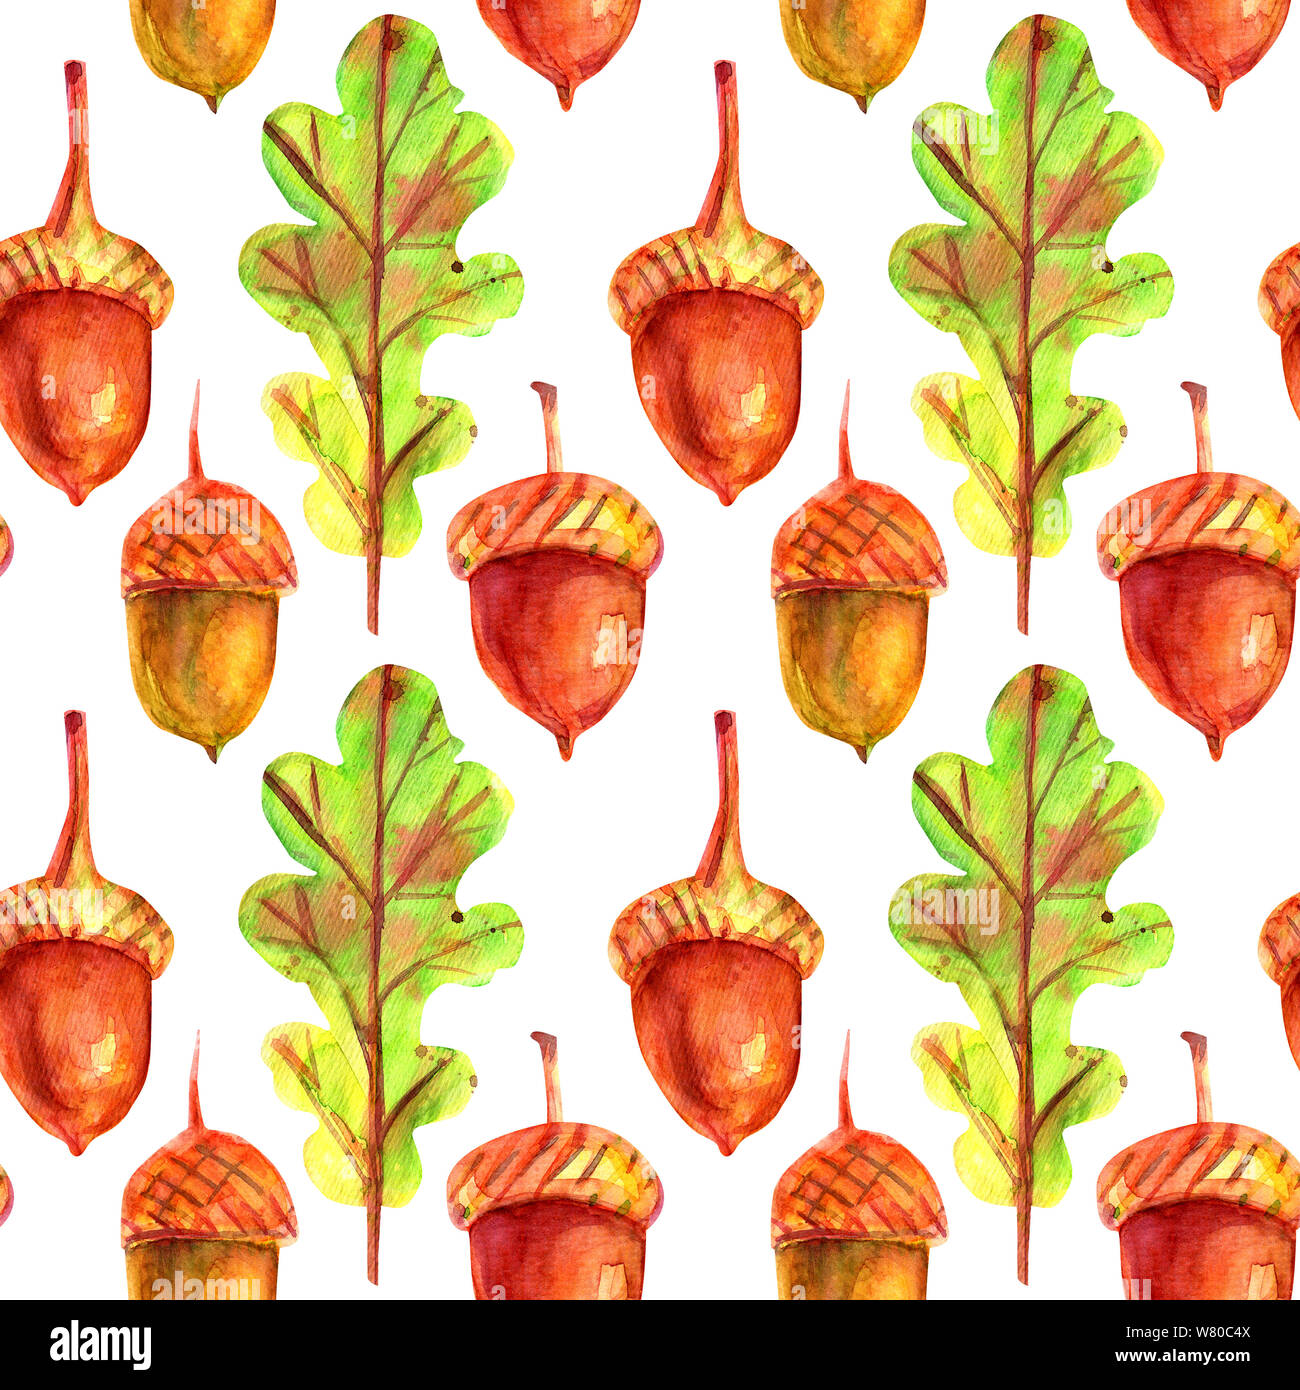 Seamless pattern with oak leaves and acorns. Watercolor autumn green leaves with colorful drops and splashes on a white background. Template for desig Stock Photo